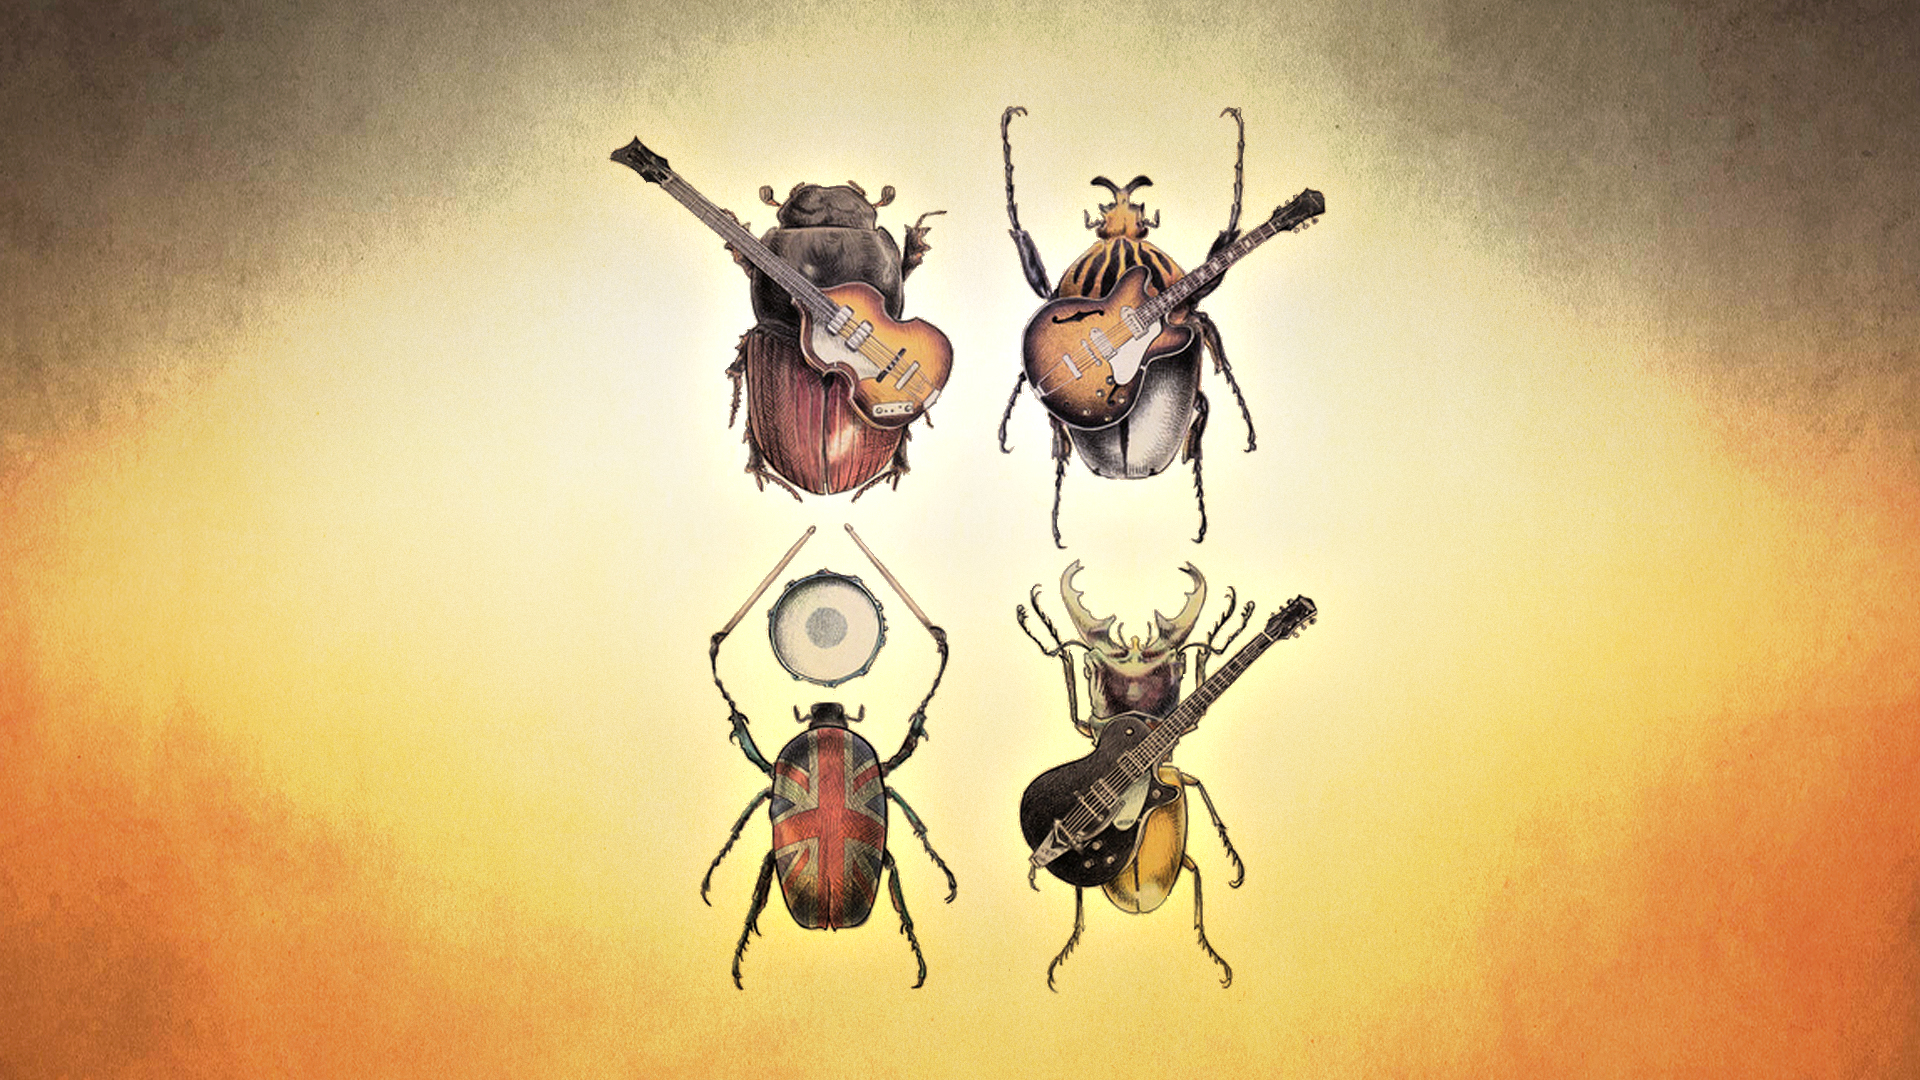 the, Beatles, Beetle, Insects, Guitar, Bands, Groups, Humor, Funny Wallpaper